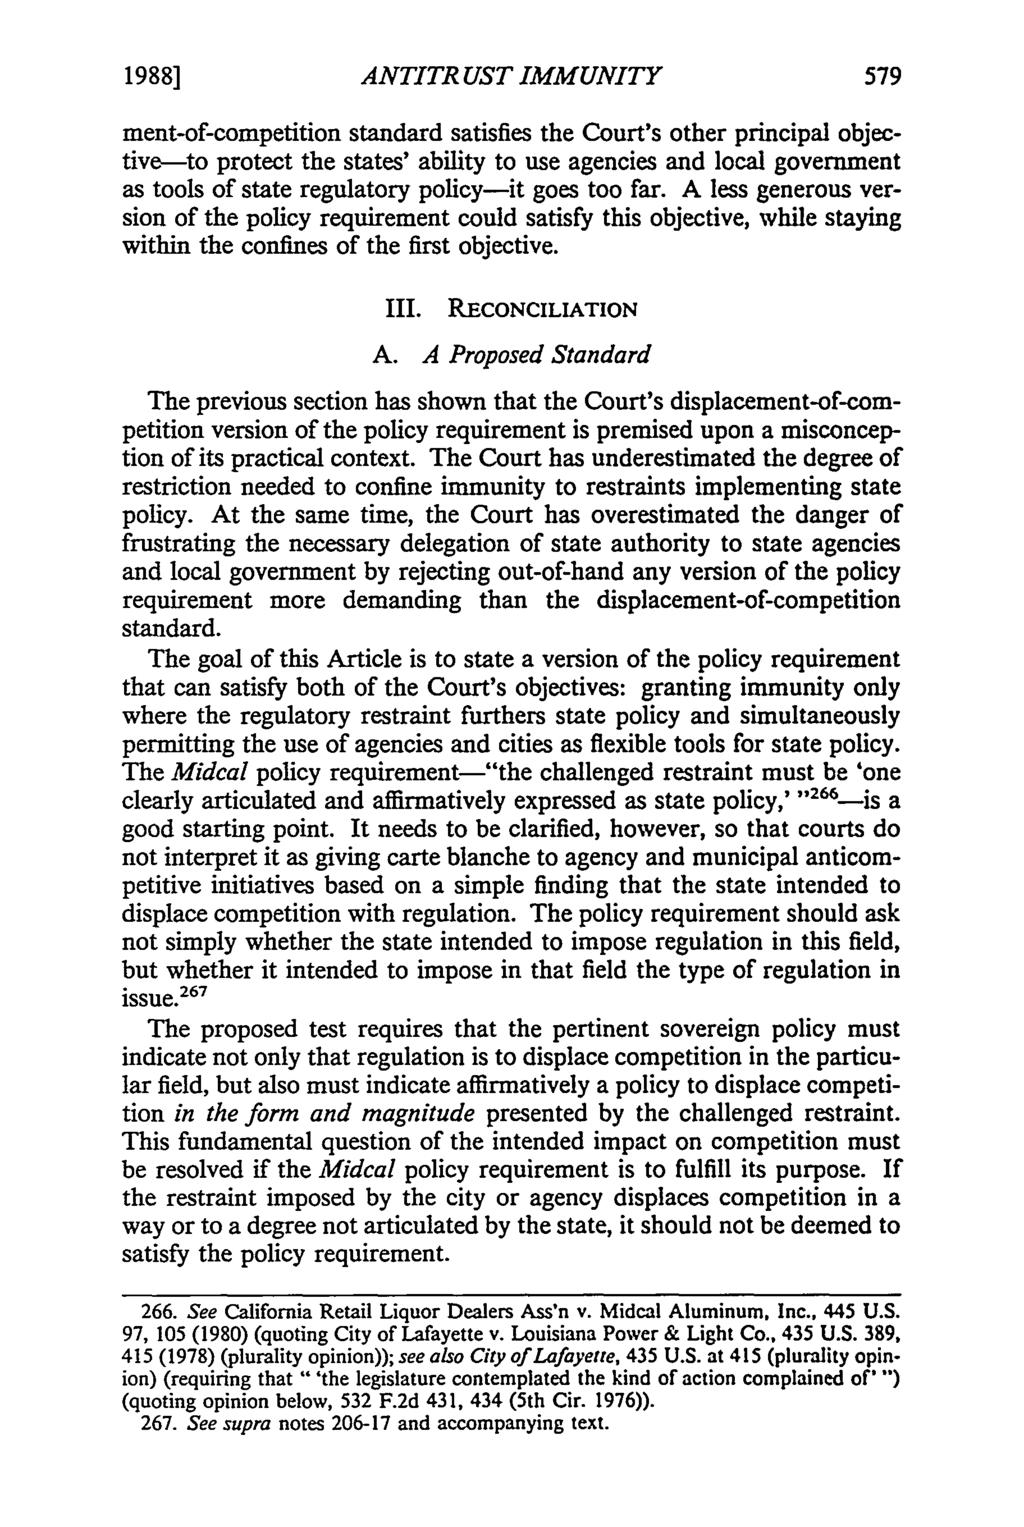 1988] ANTITRUST IMMUNITY ment-of-competition standard satisfies the Court's other principal objective-to protect the states' ability to use agencies and local government as tools of state regulatory